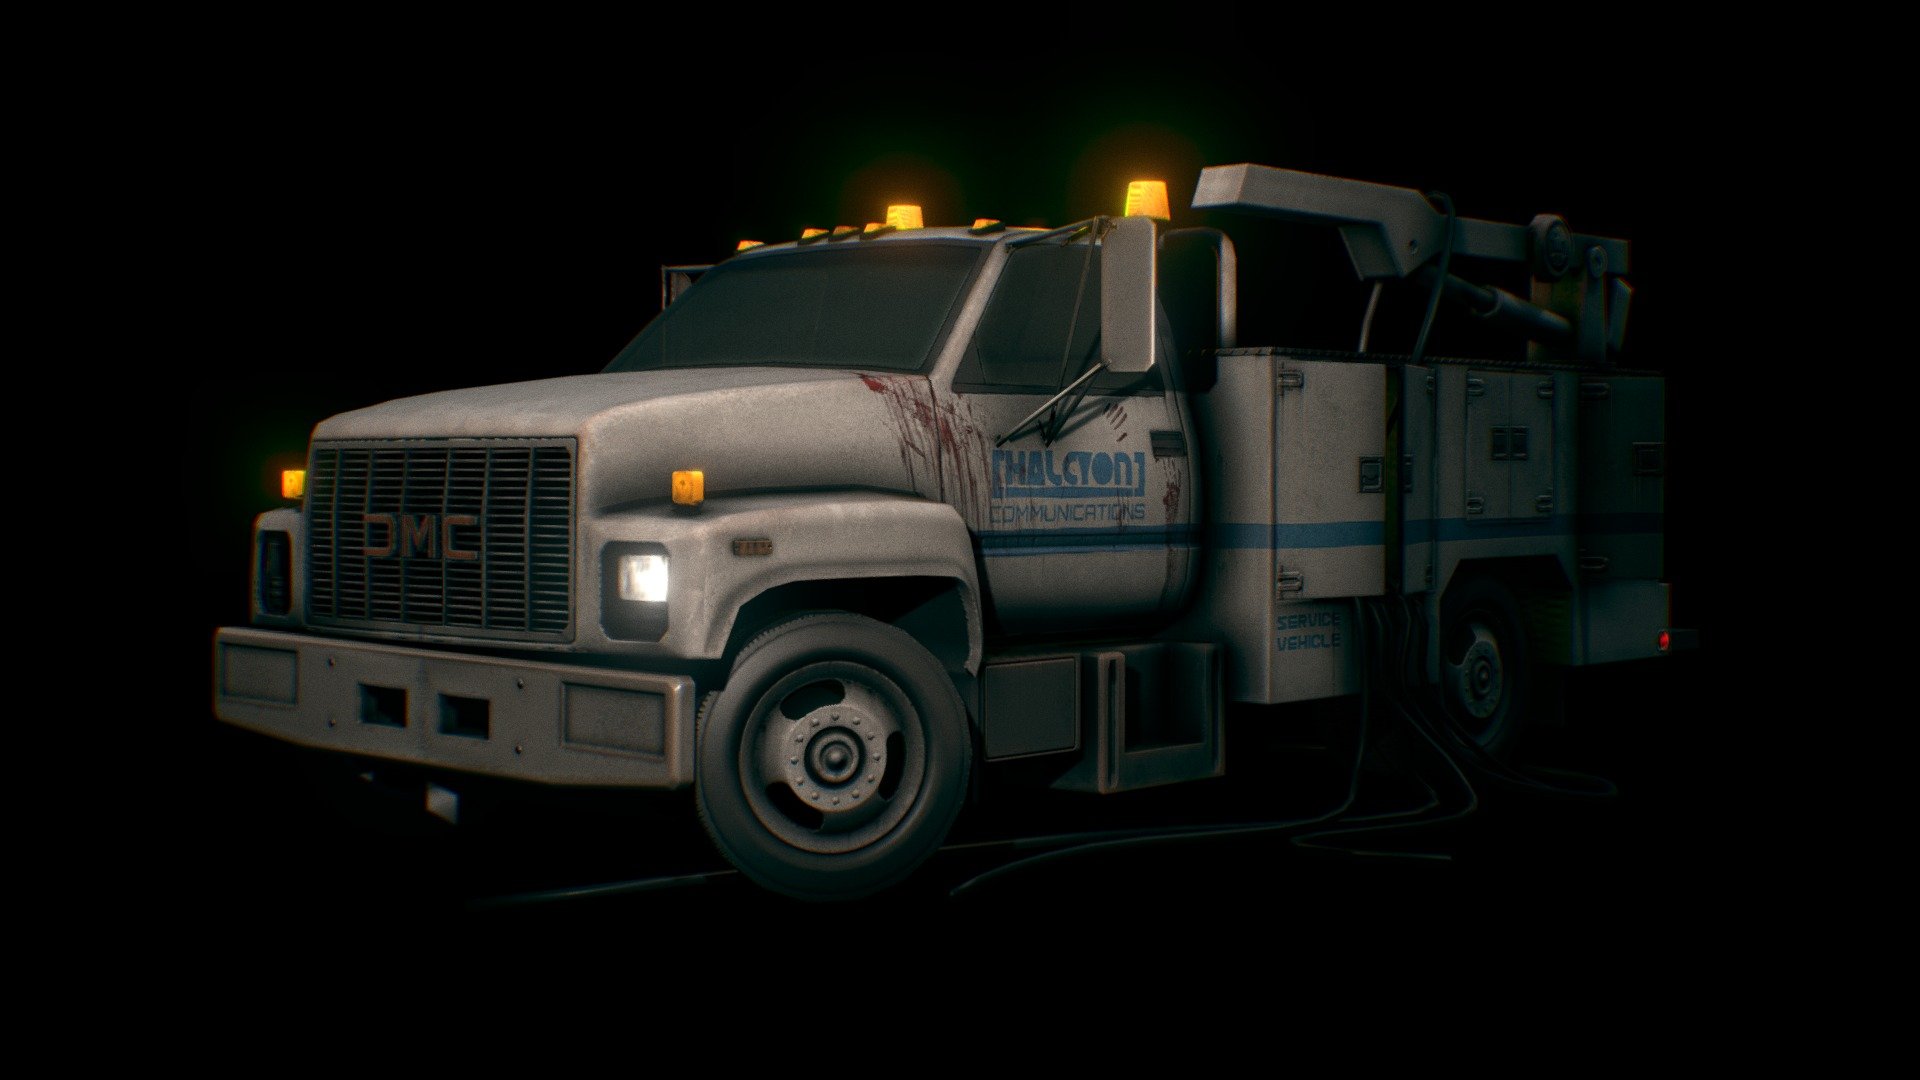 A perfectly non-anomalous, average utility truck, and nothing more.

Made in 3DSMax and Substance Painter, as something to play around with sketchfab's viewer with - Dead Signal - 3D model by Renafox (@kryik1023) 3d model